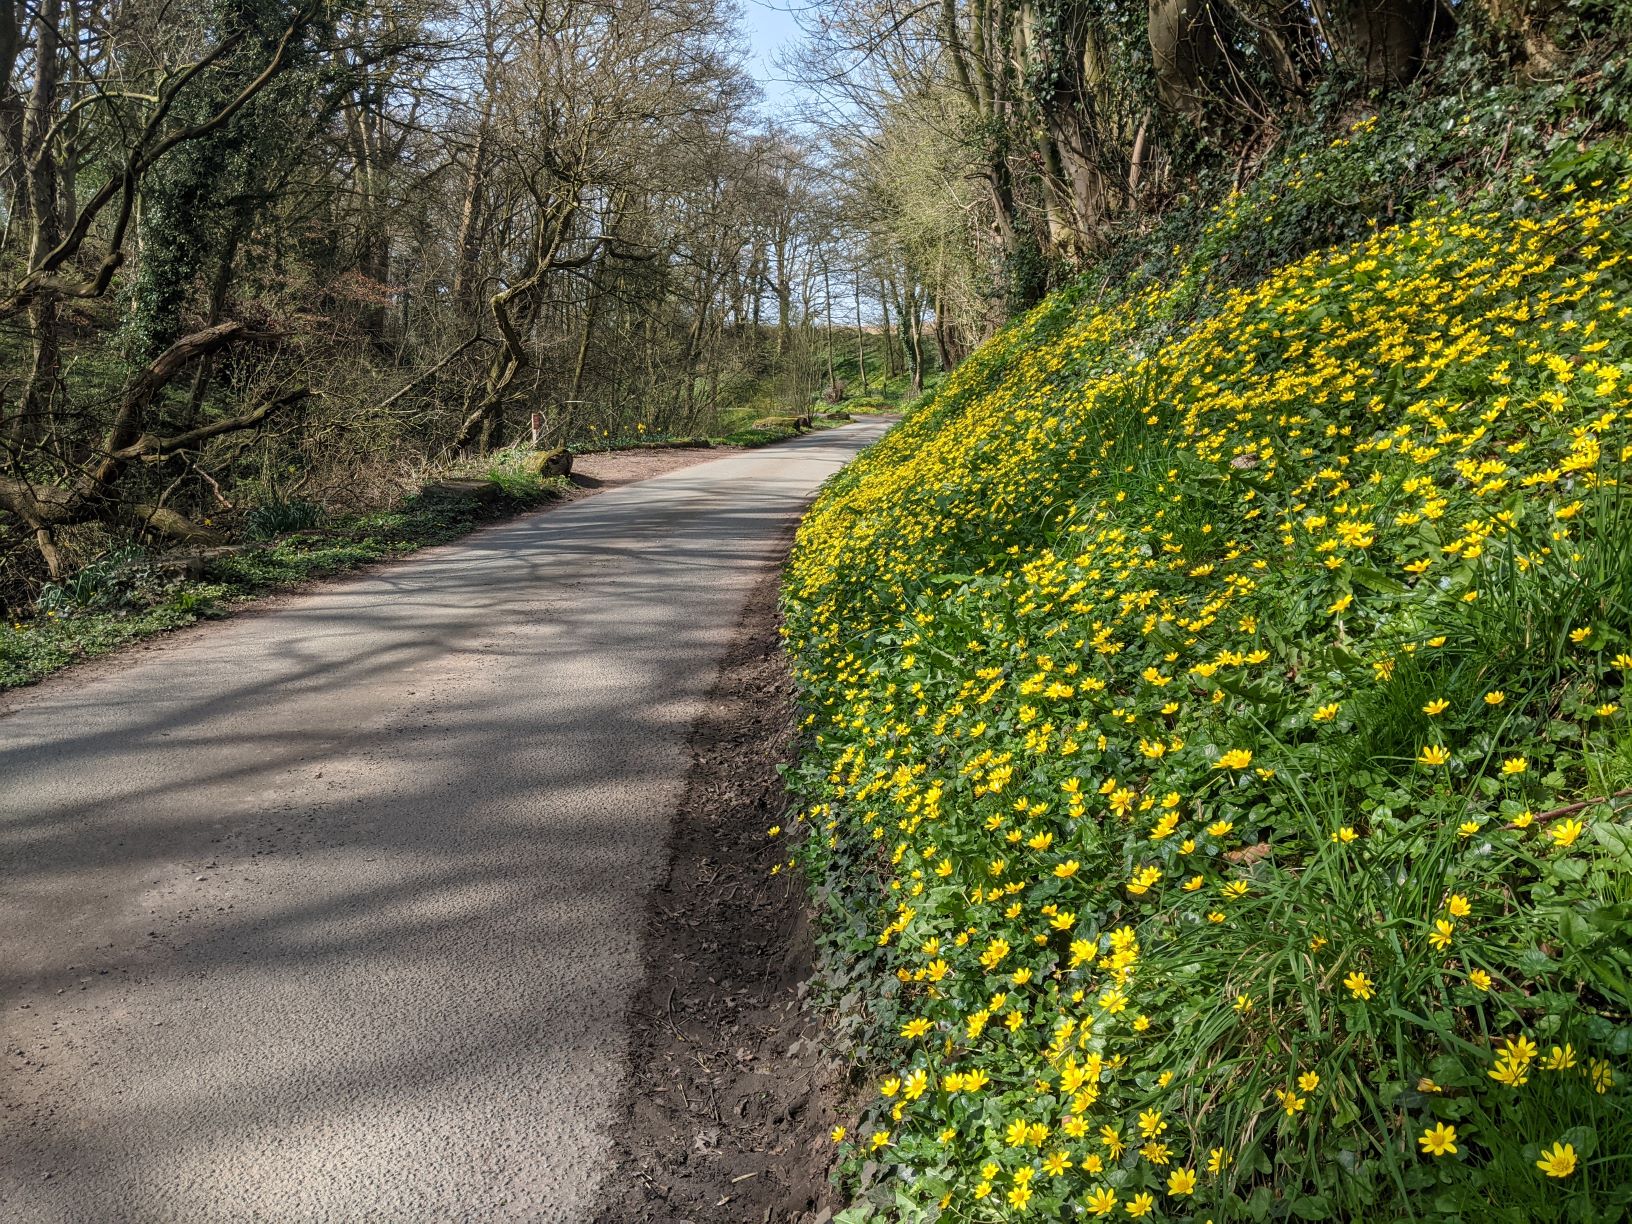 Bank of Celandines in Mill Lane, March 30th 2021